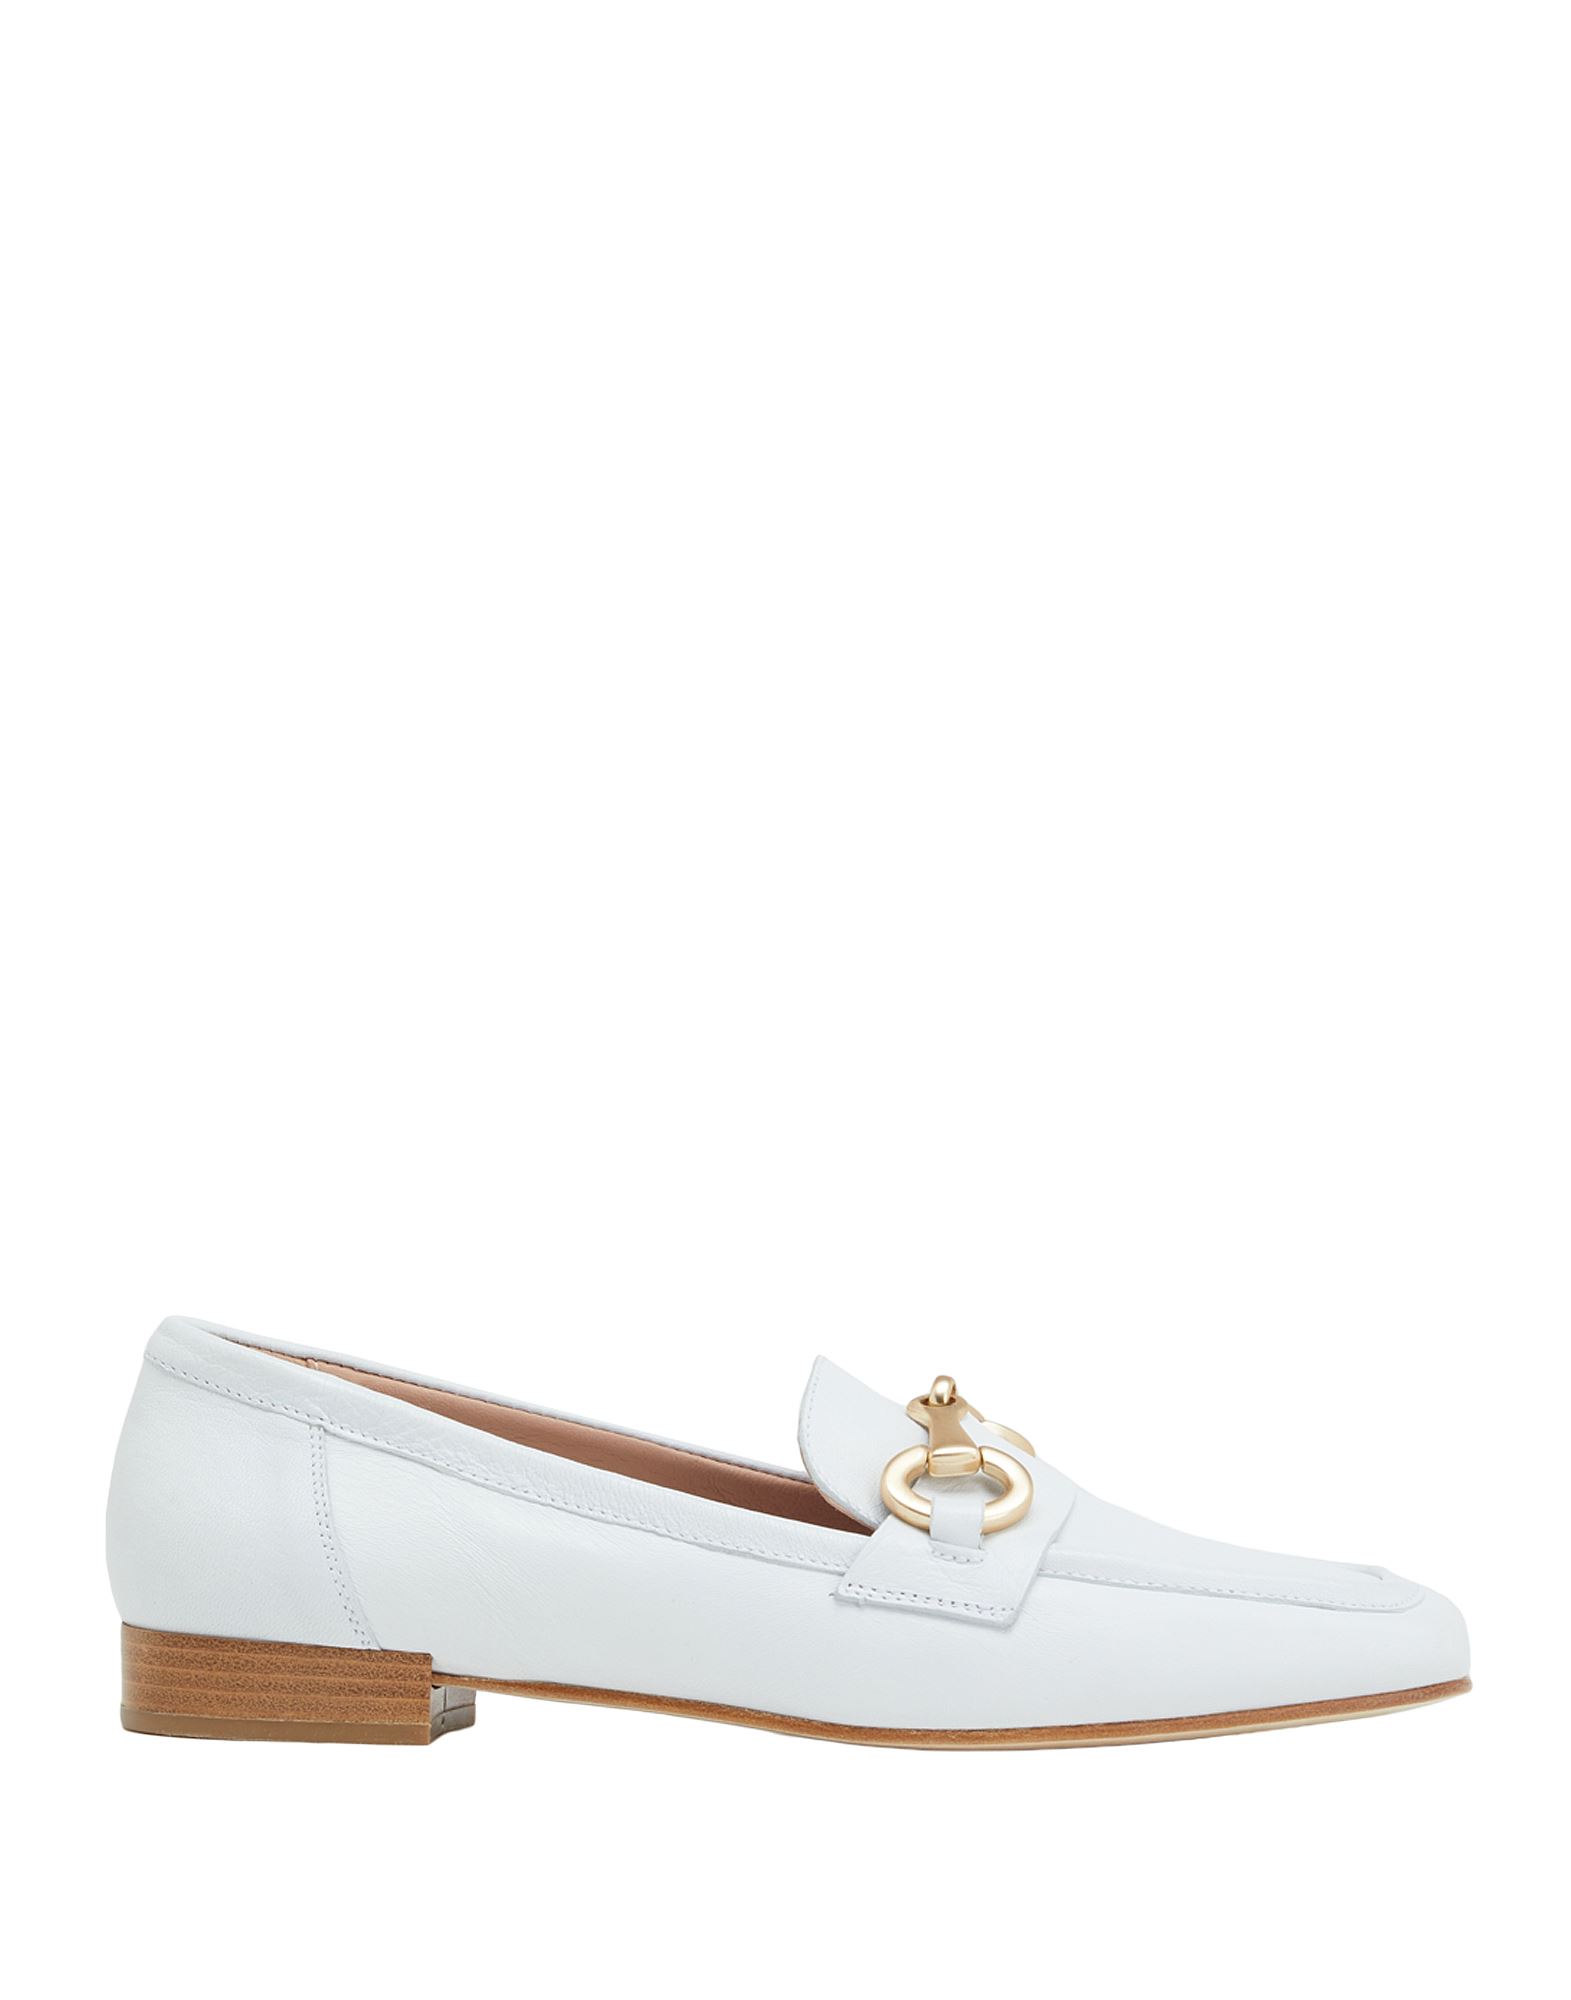 8 By Yoox Loafers In White